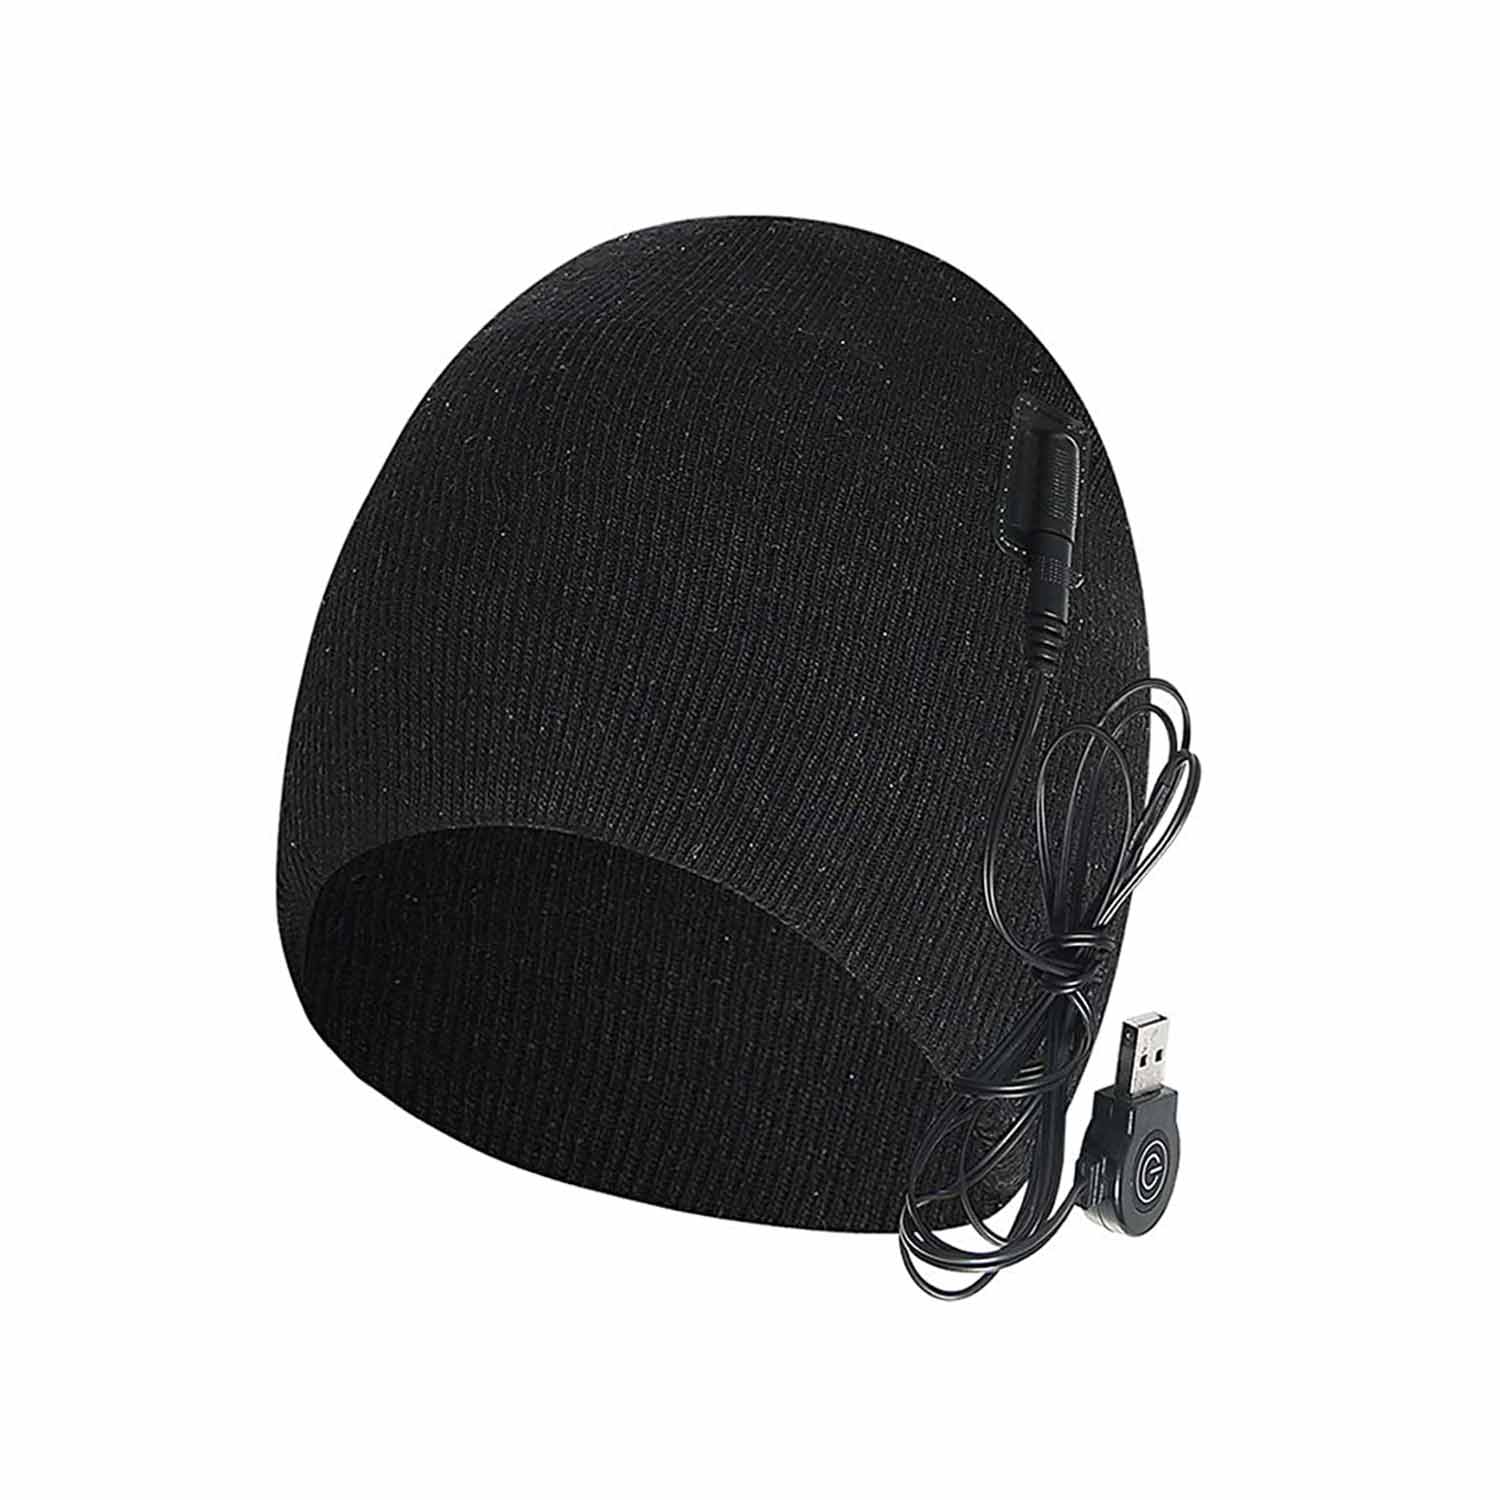 Battery heating hat